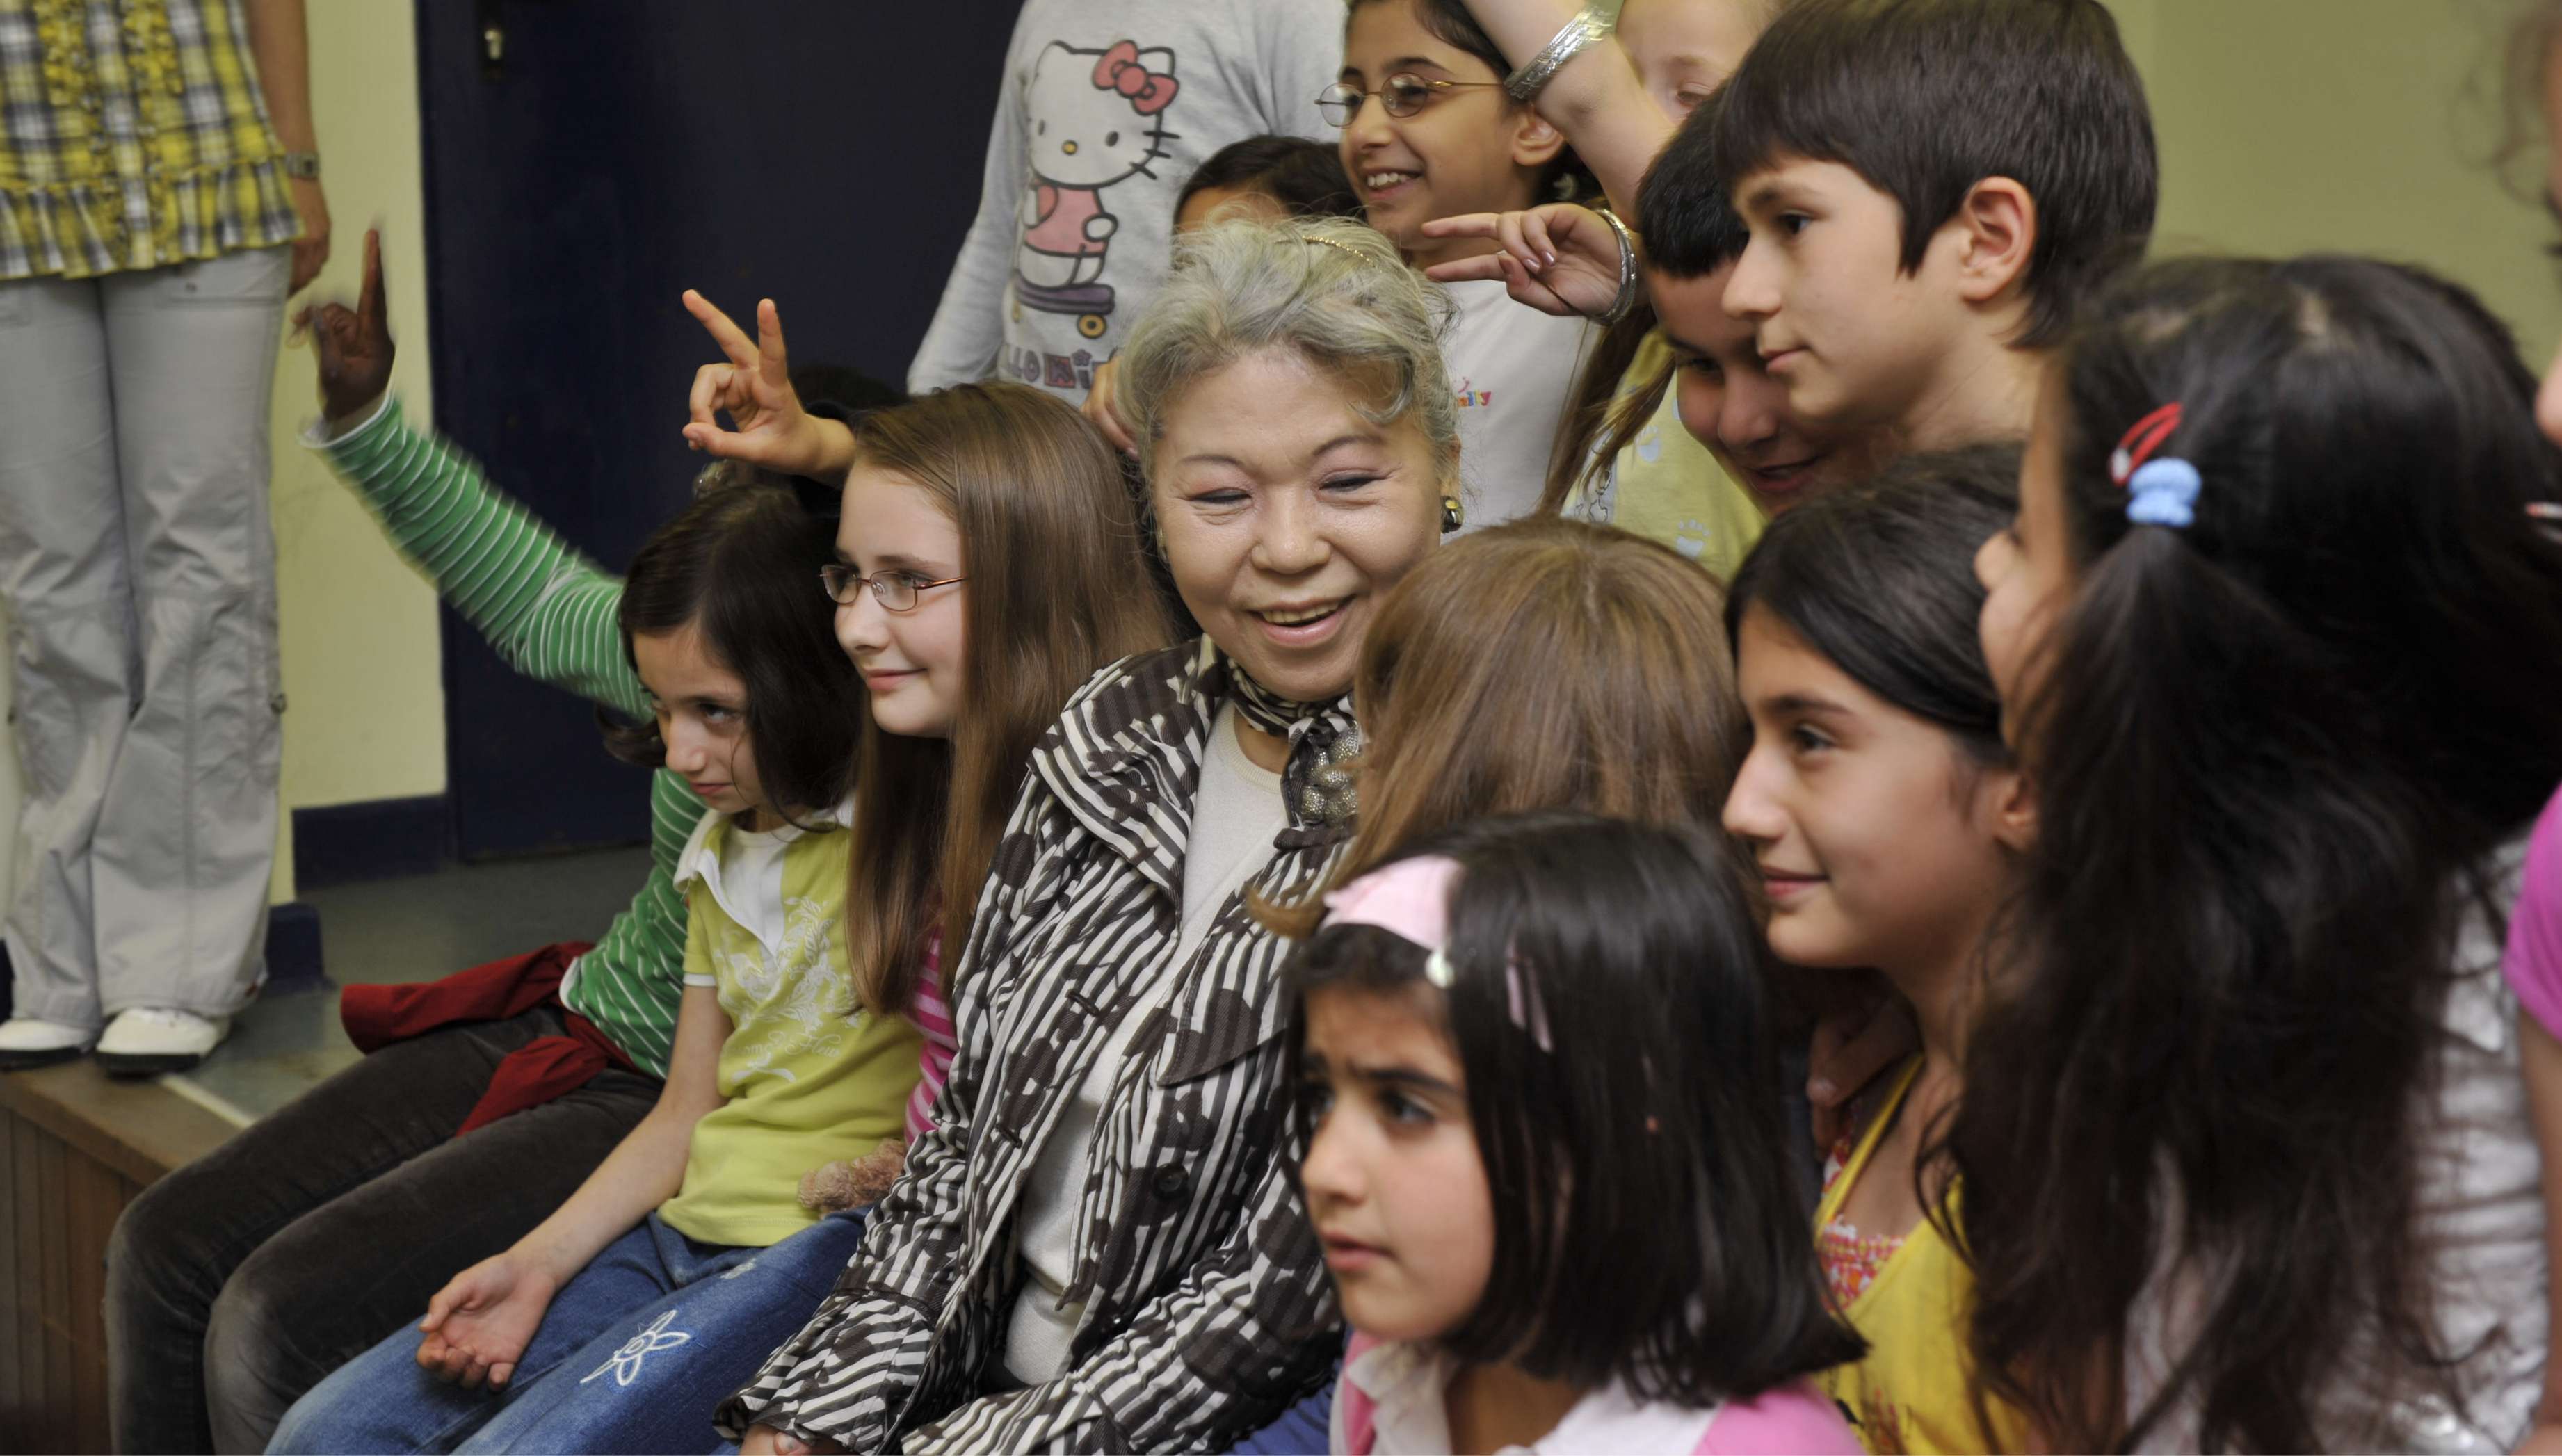 Her Holiness sits, smiling, with a diverse group of children as they participate in an activity.